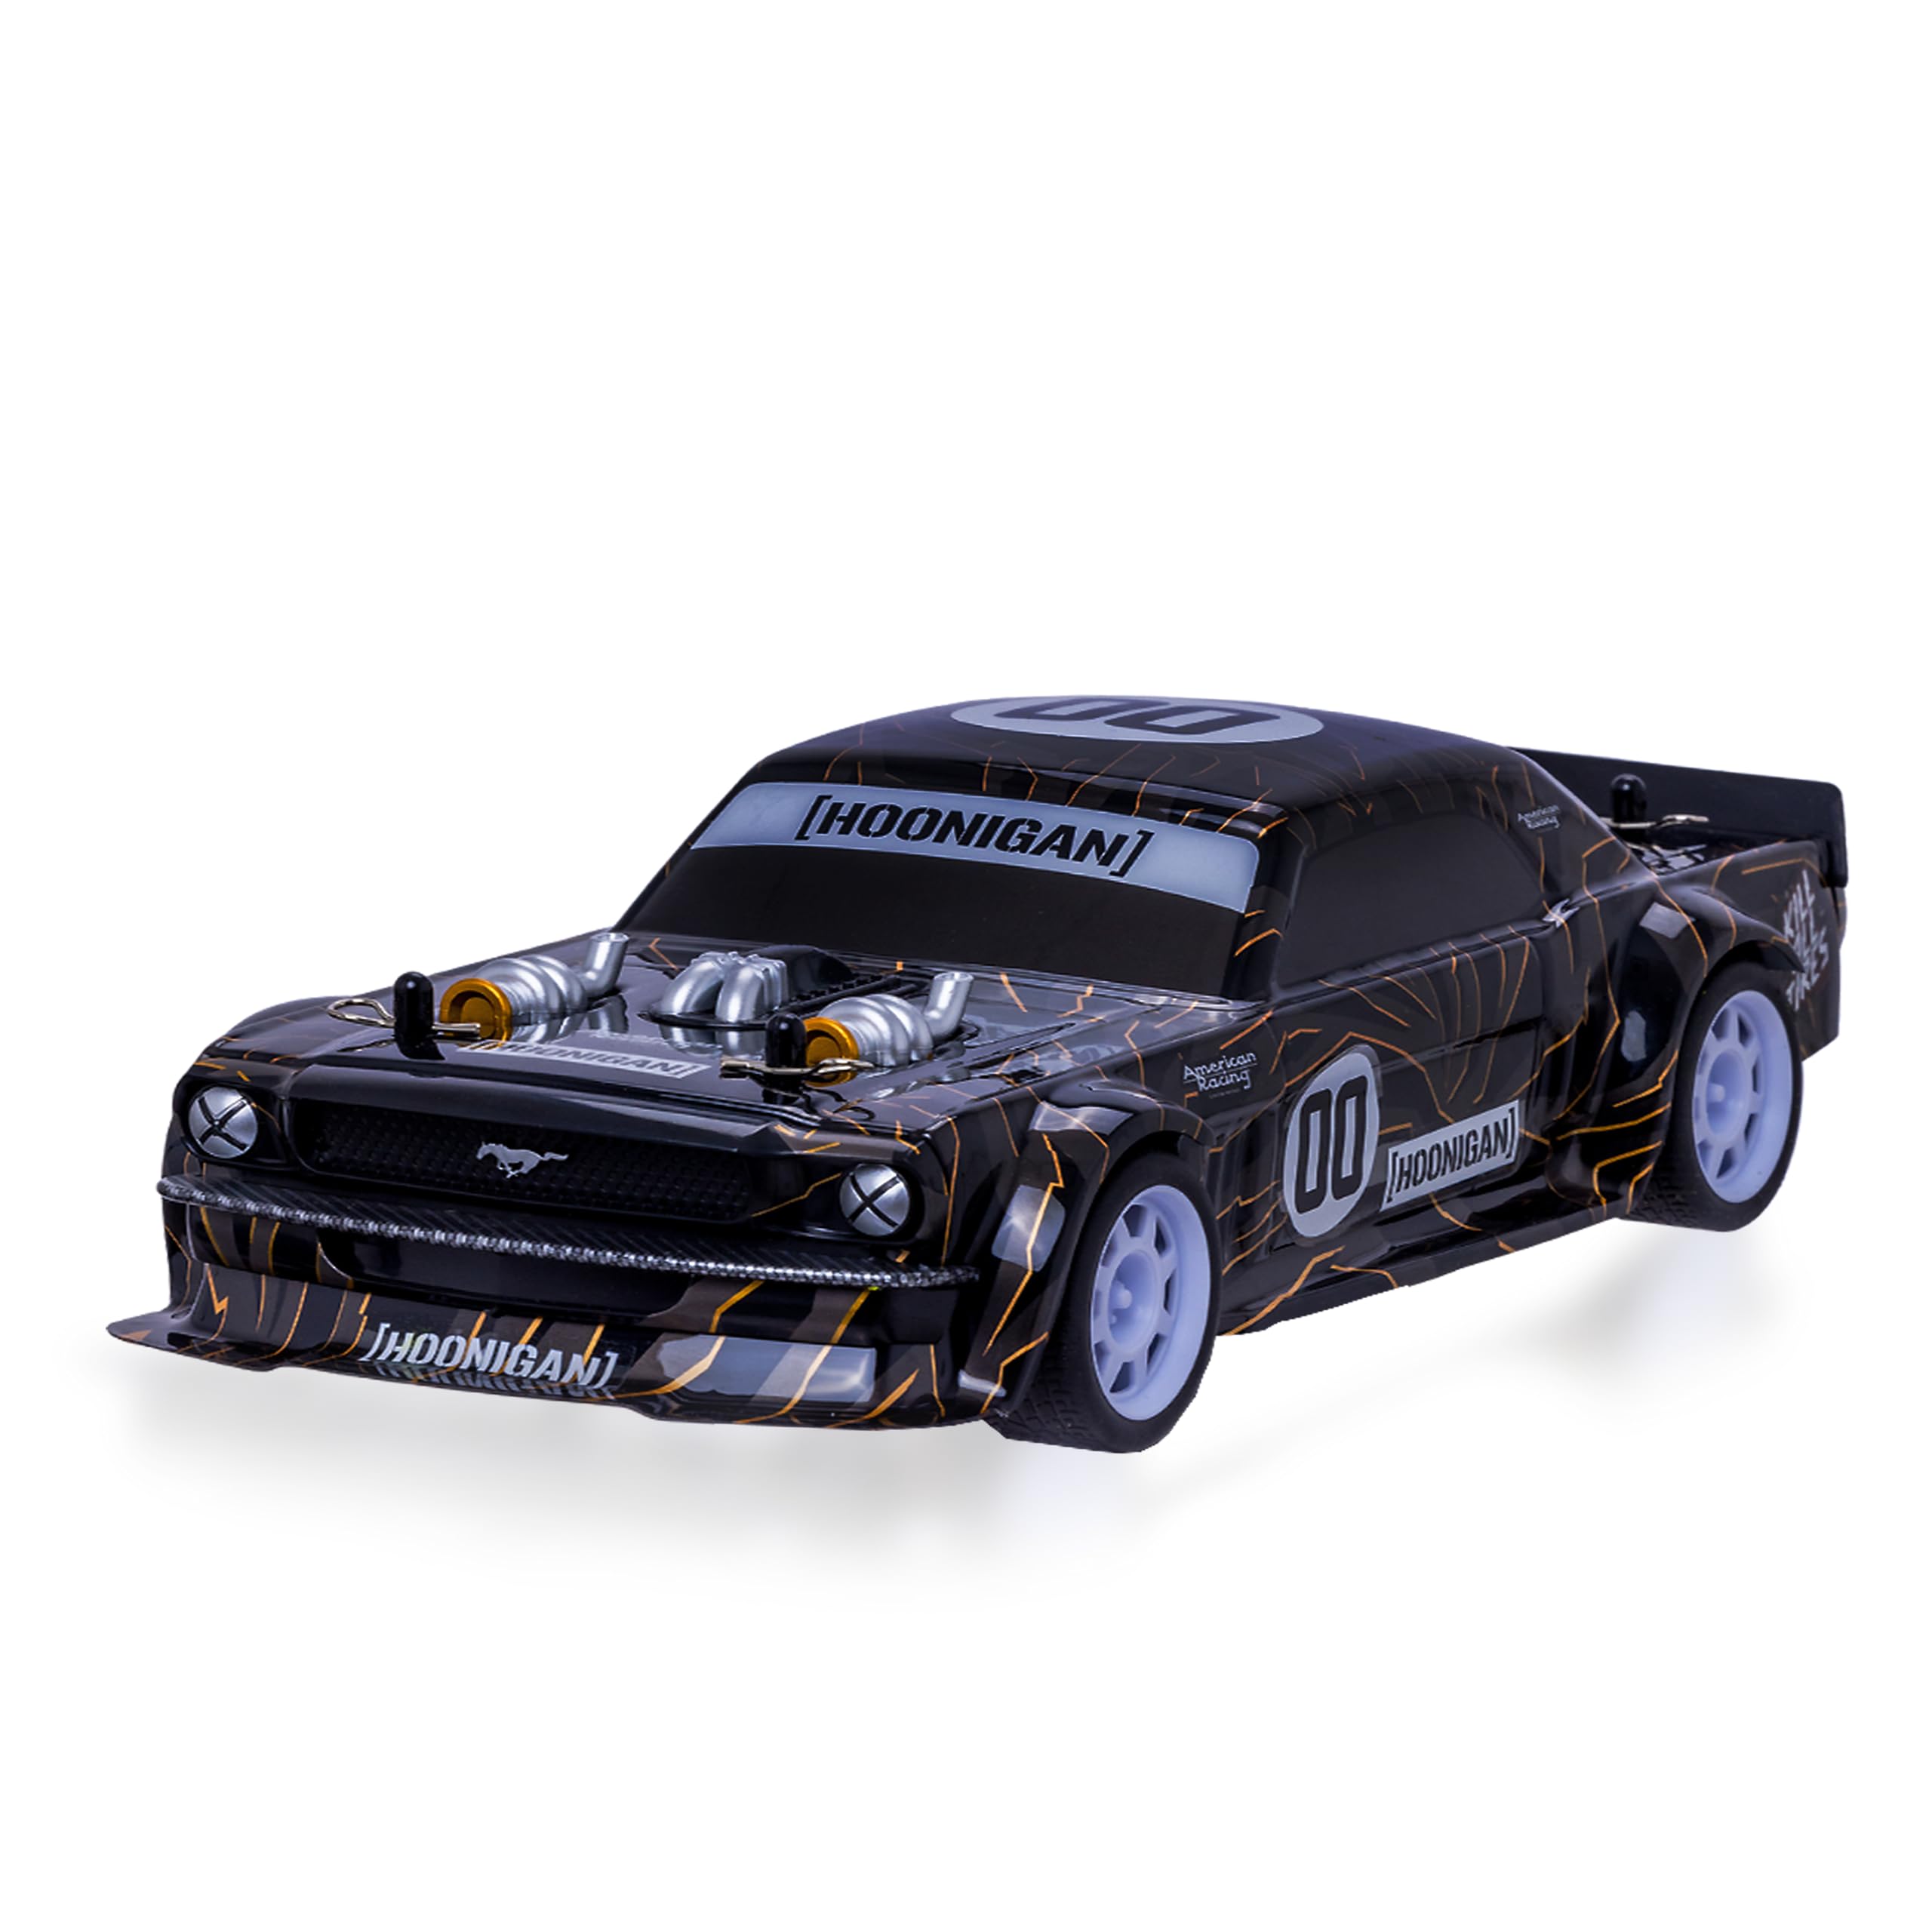 Flybar Hoonigan, Mustang Remote Control Car for Kids – RC Drift Car, RC Cars, Race Car, 3.7V, 2.4 GHz, Detailed Replica Design, USB Rechargeable Battery Included, 1:32 Scale, 100 ft Range, 4 Mph